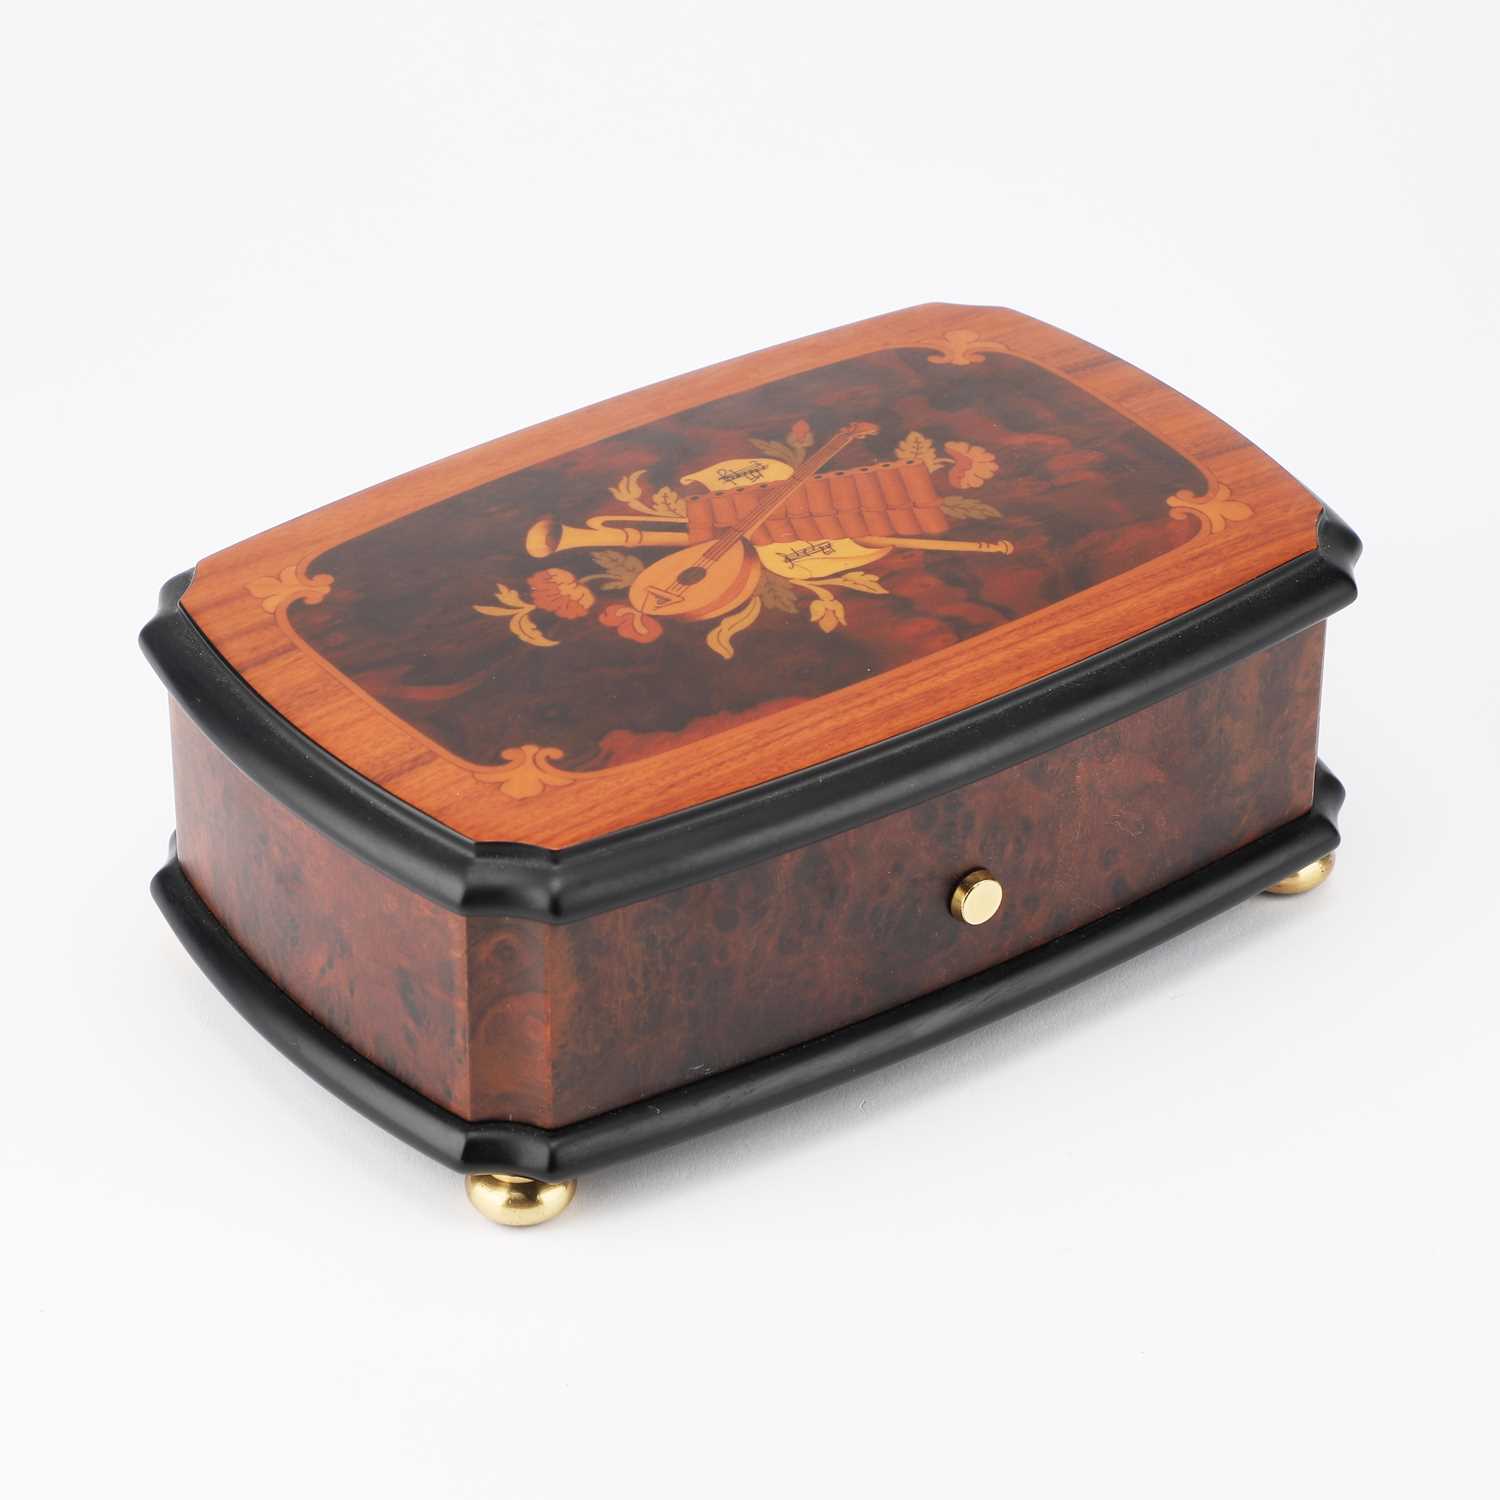 A SWISS INLAID REUGE MUSIC BOX - Image 2 of 4